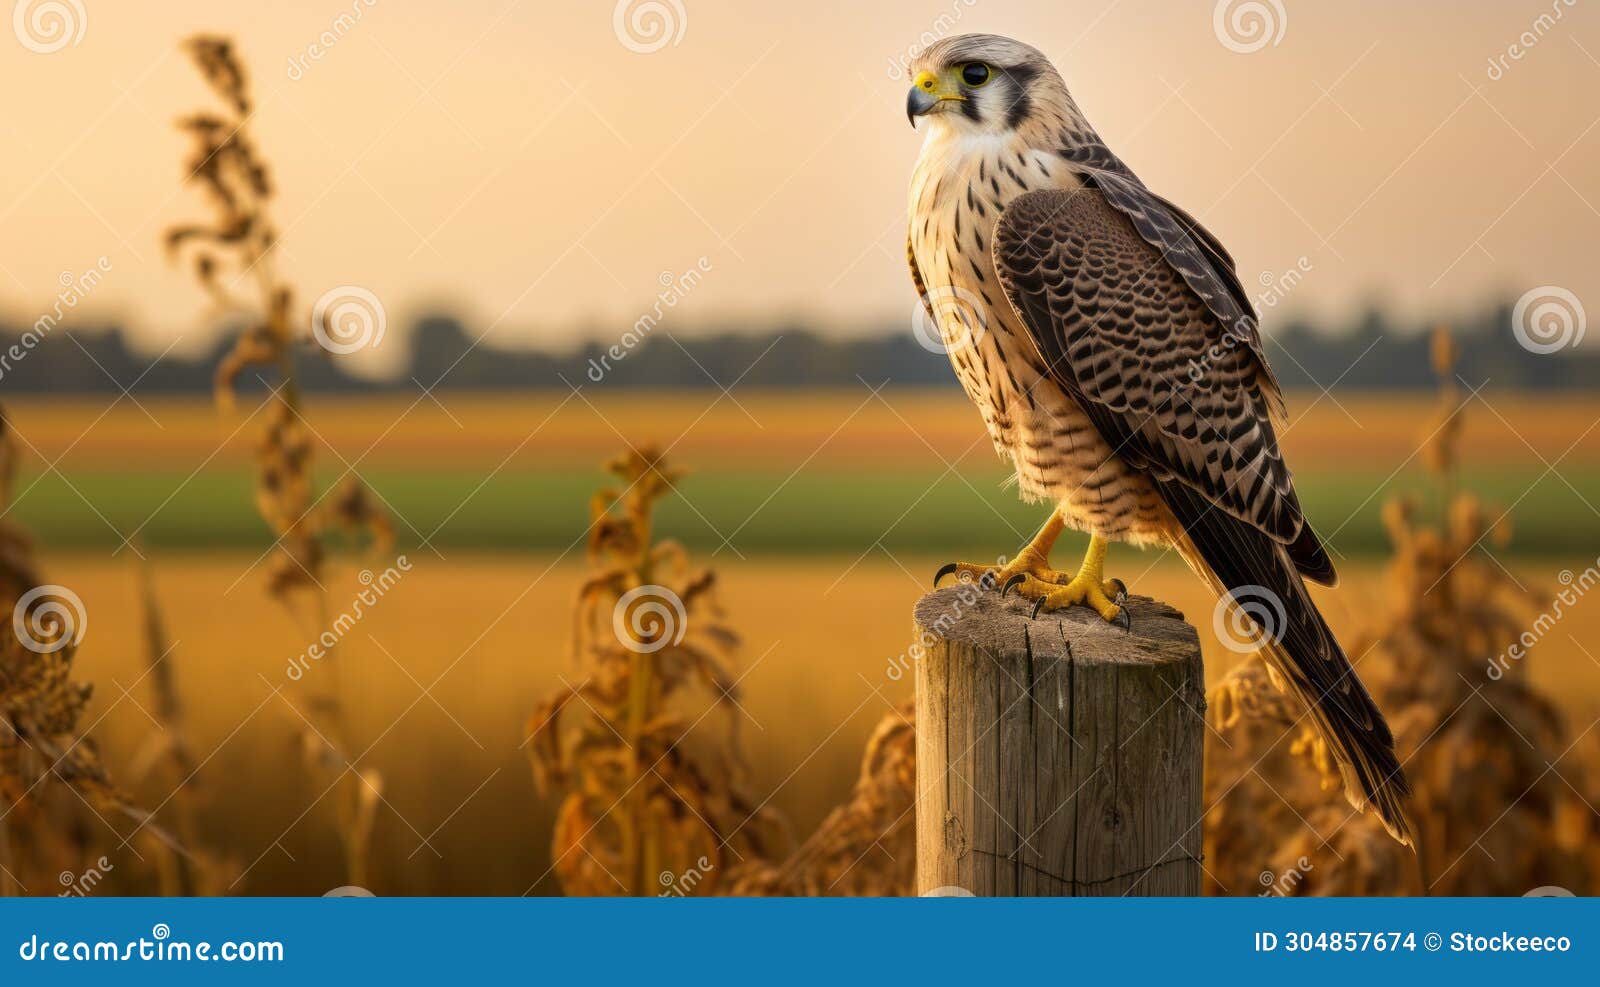 glowing falcon: stunning 8k resolution photo of a happy bird in a field